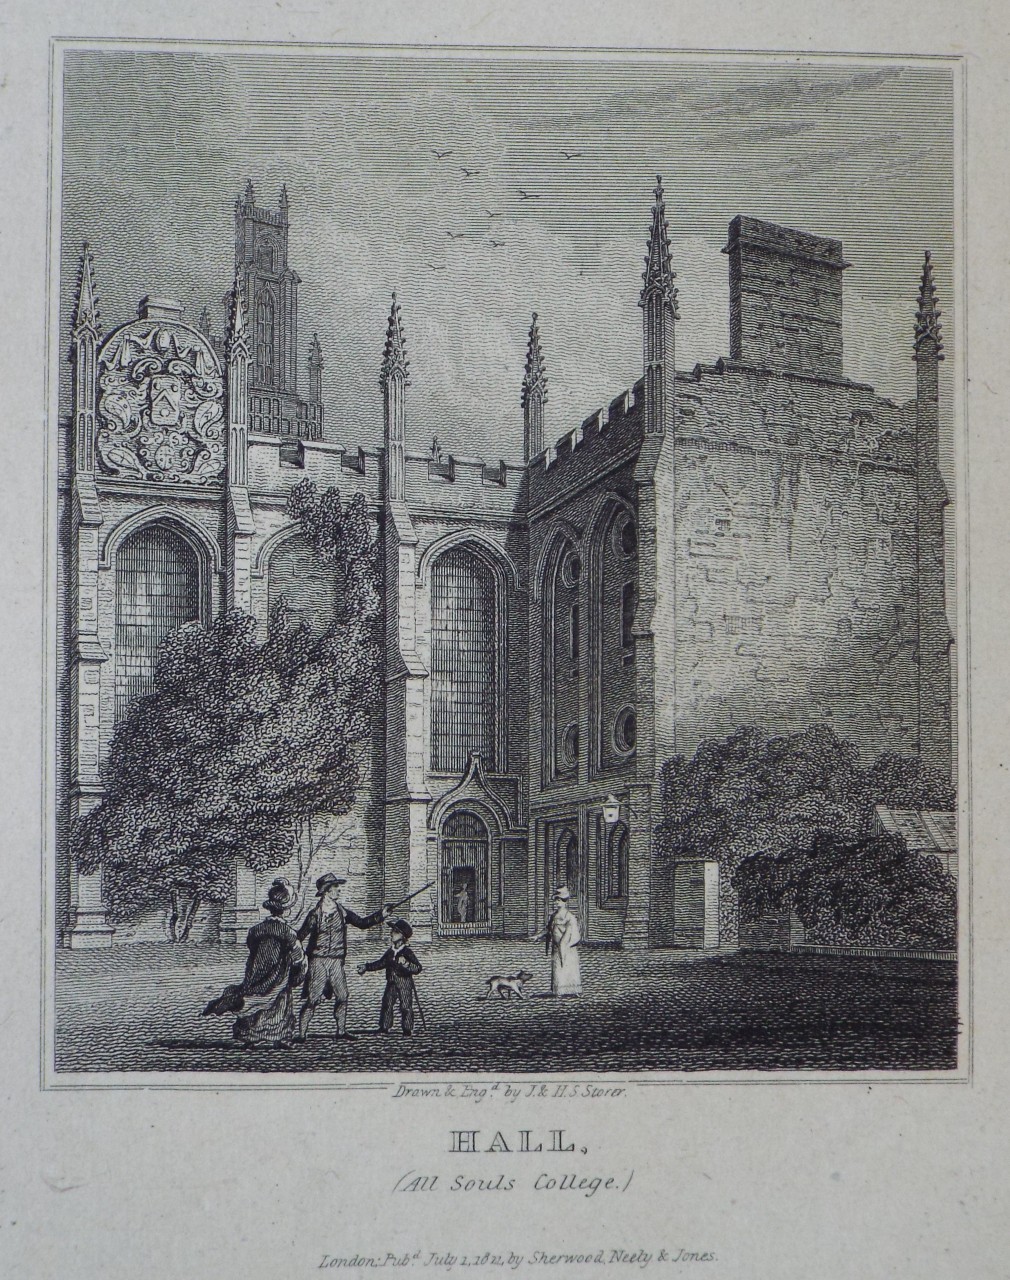 Print - Hall. (All Souls College.) - Storer